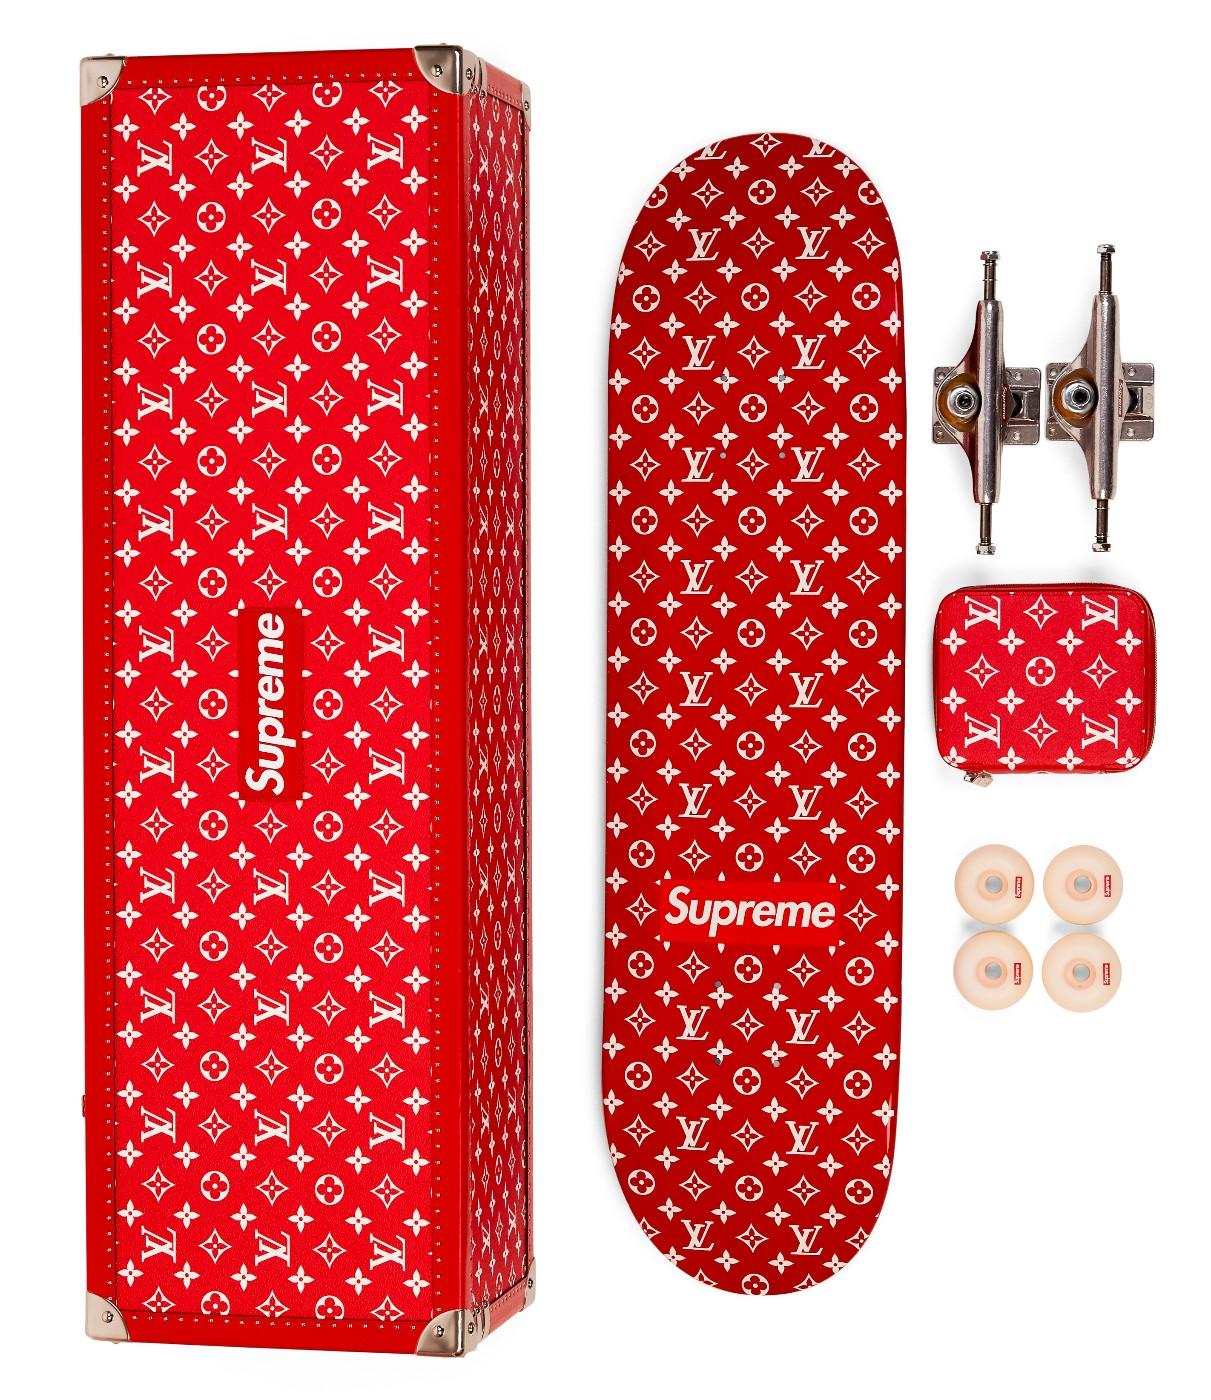 Sotheby's to Auction Complete Archive of Supreme Skate Decks | Art & Object